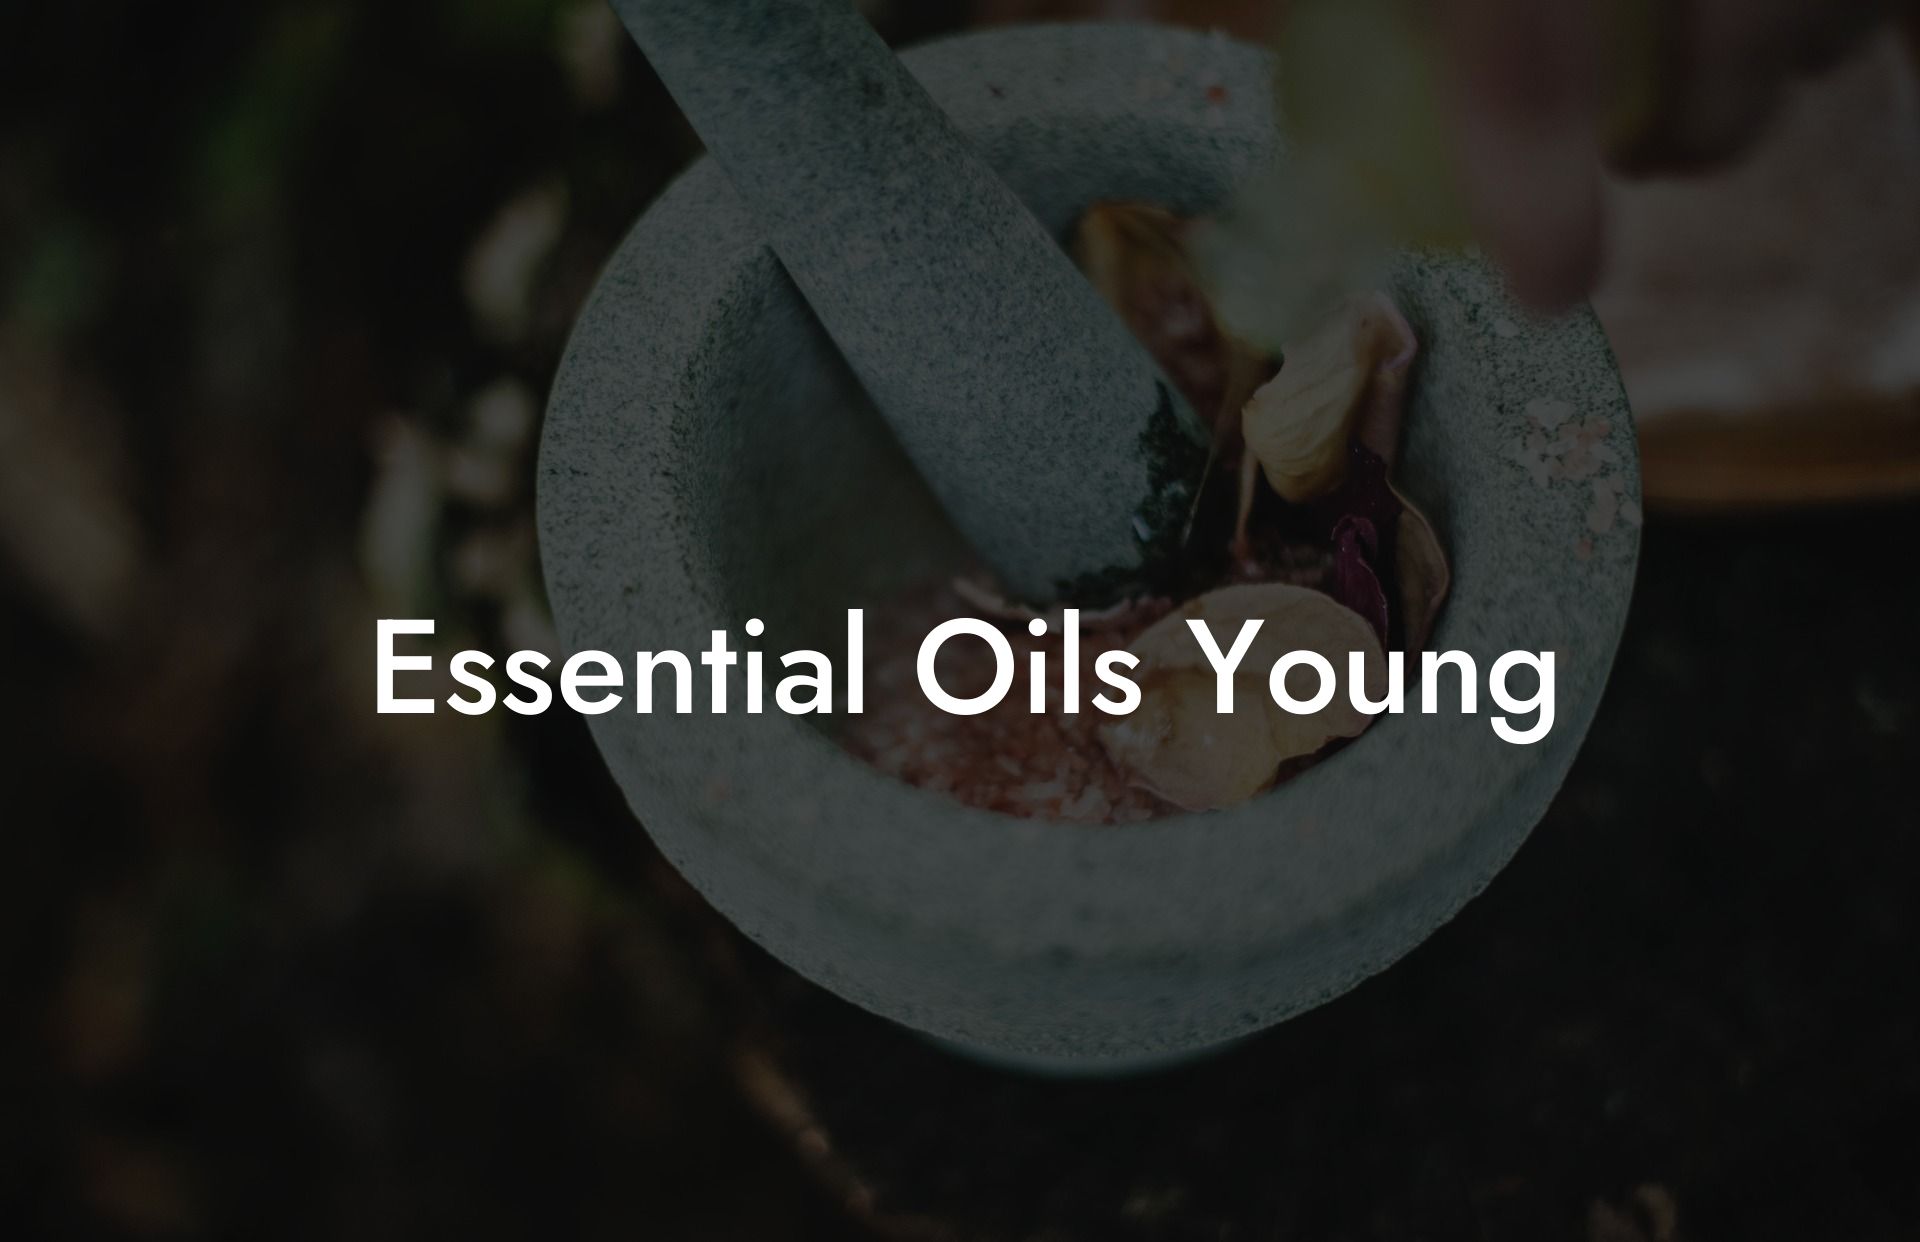 Essential Oils Young